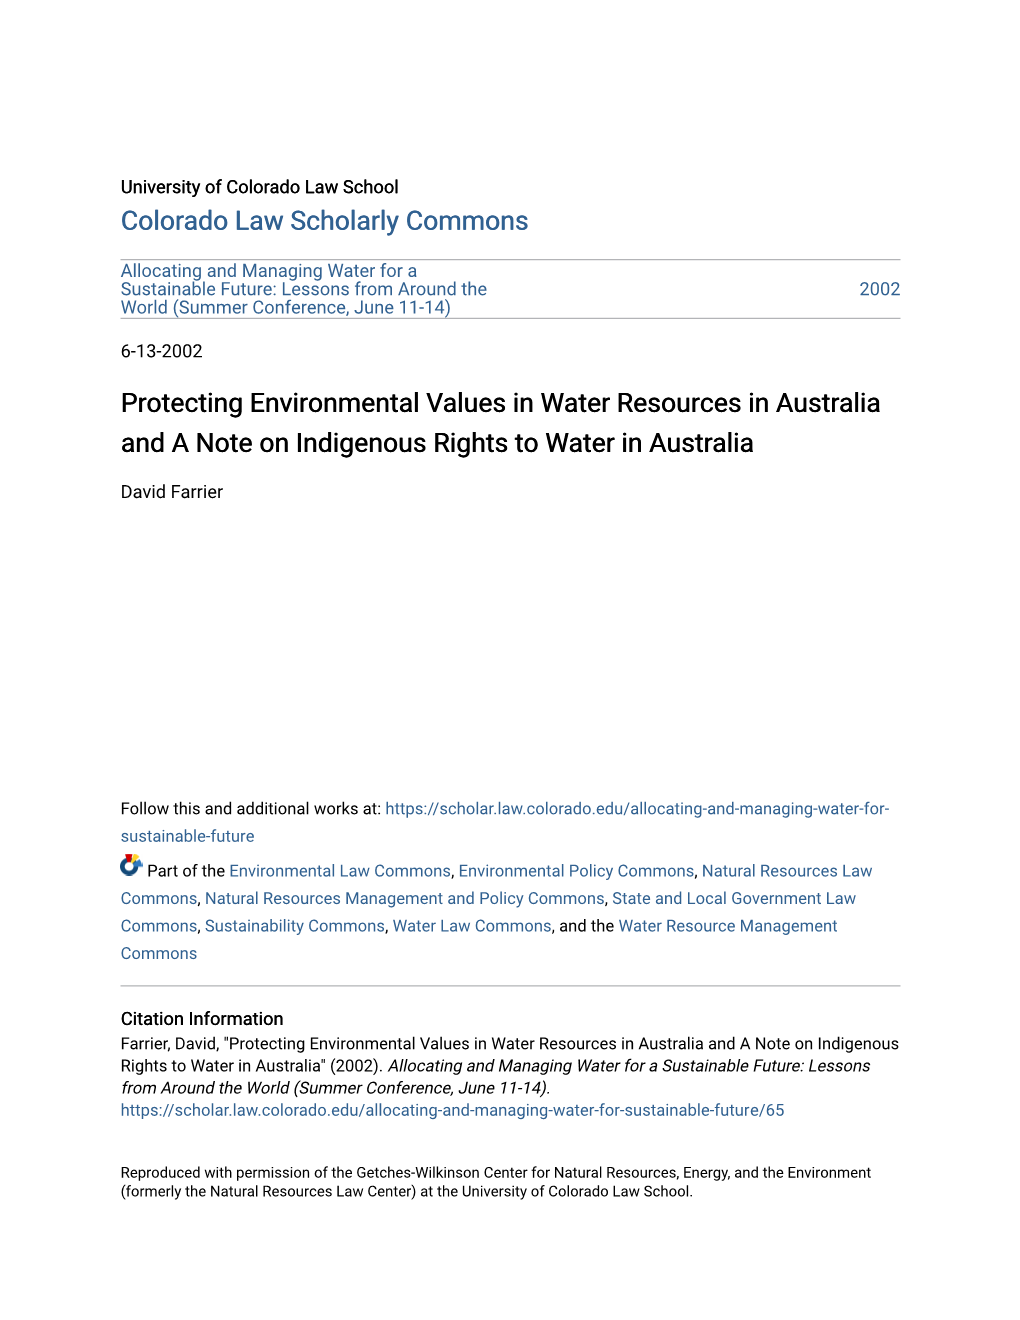 Protecting Environmental Values in Water Resources in Australia and a Note on Indigenous Rights to Water in Australia